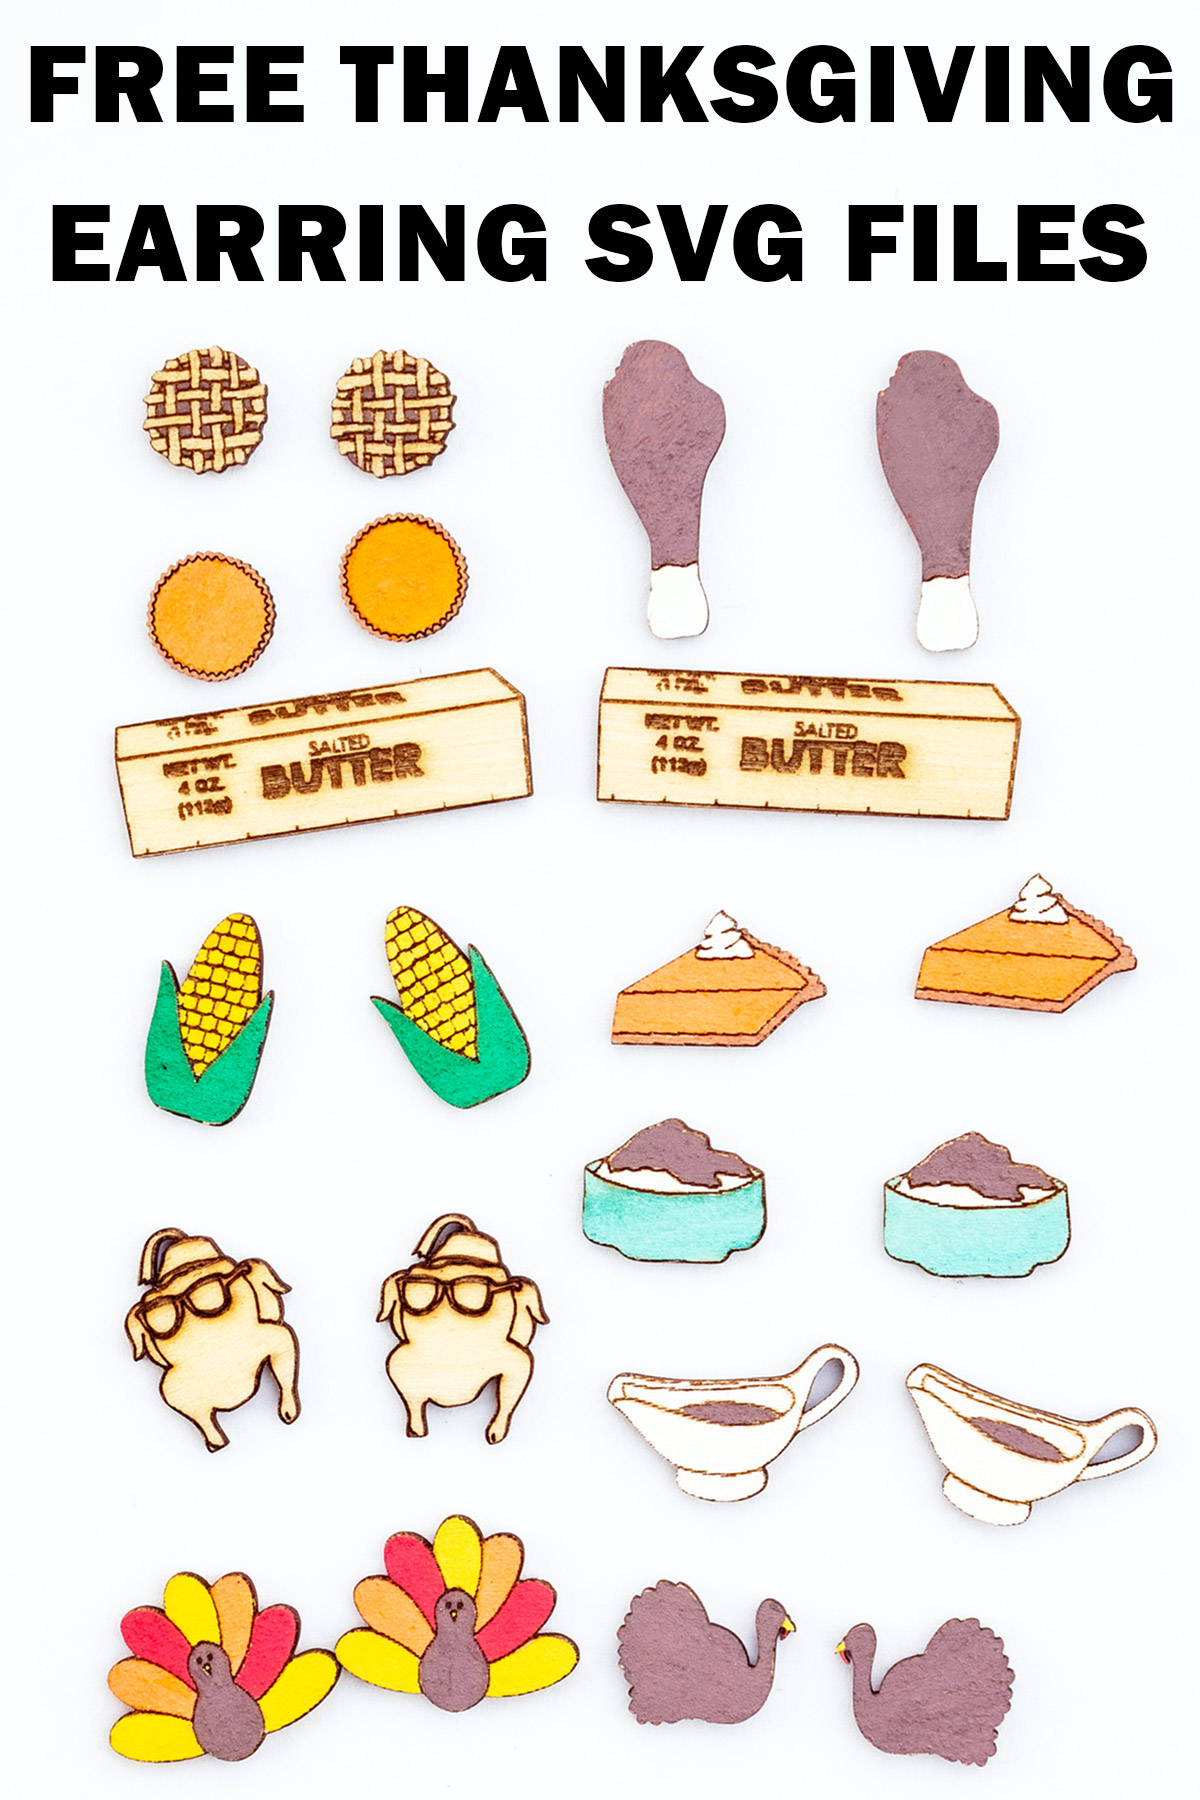 At the top it says free Thanksgiving earring SVG files. Below that, the image shows the Thanksgiving earrings after they've been painted. They were made with the free Thanksgiving earrings svgs.